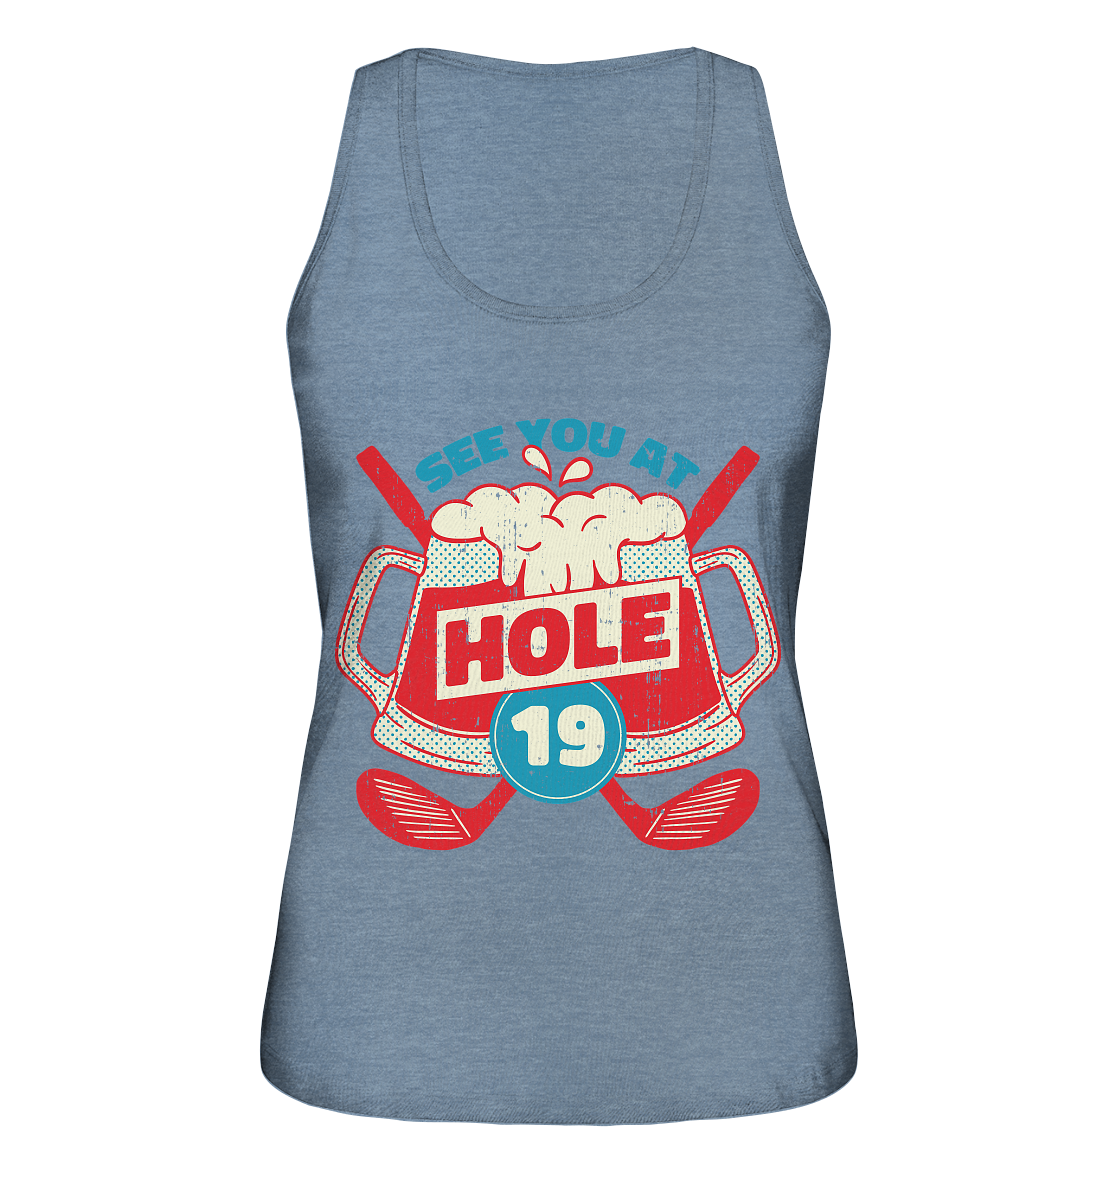 Golf ,See you at Hole 19 , Wir sehen uns bei Loch 19 - Ladies Organic Tank-Top